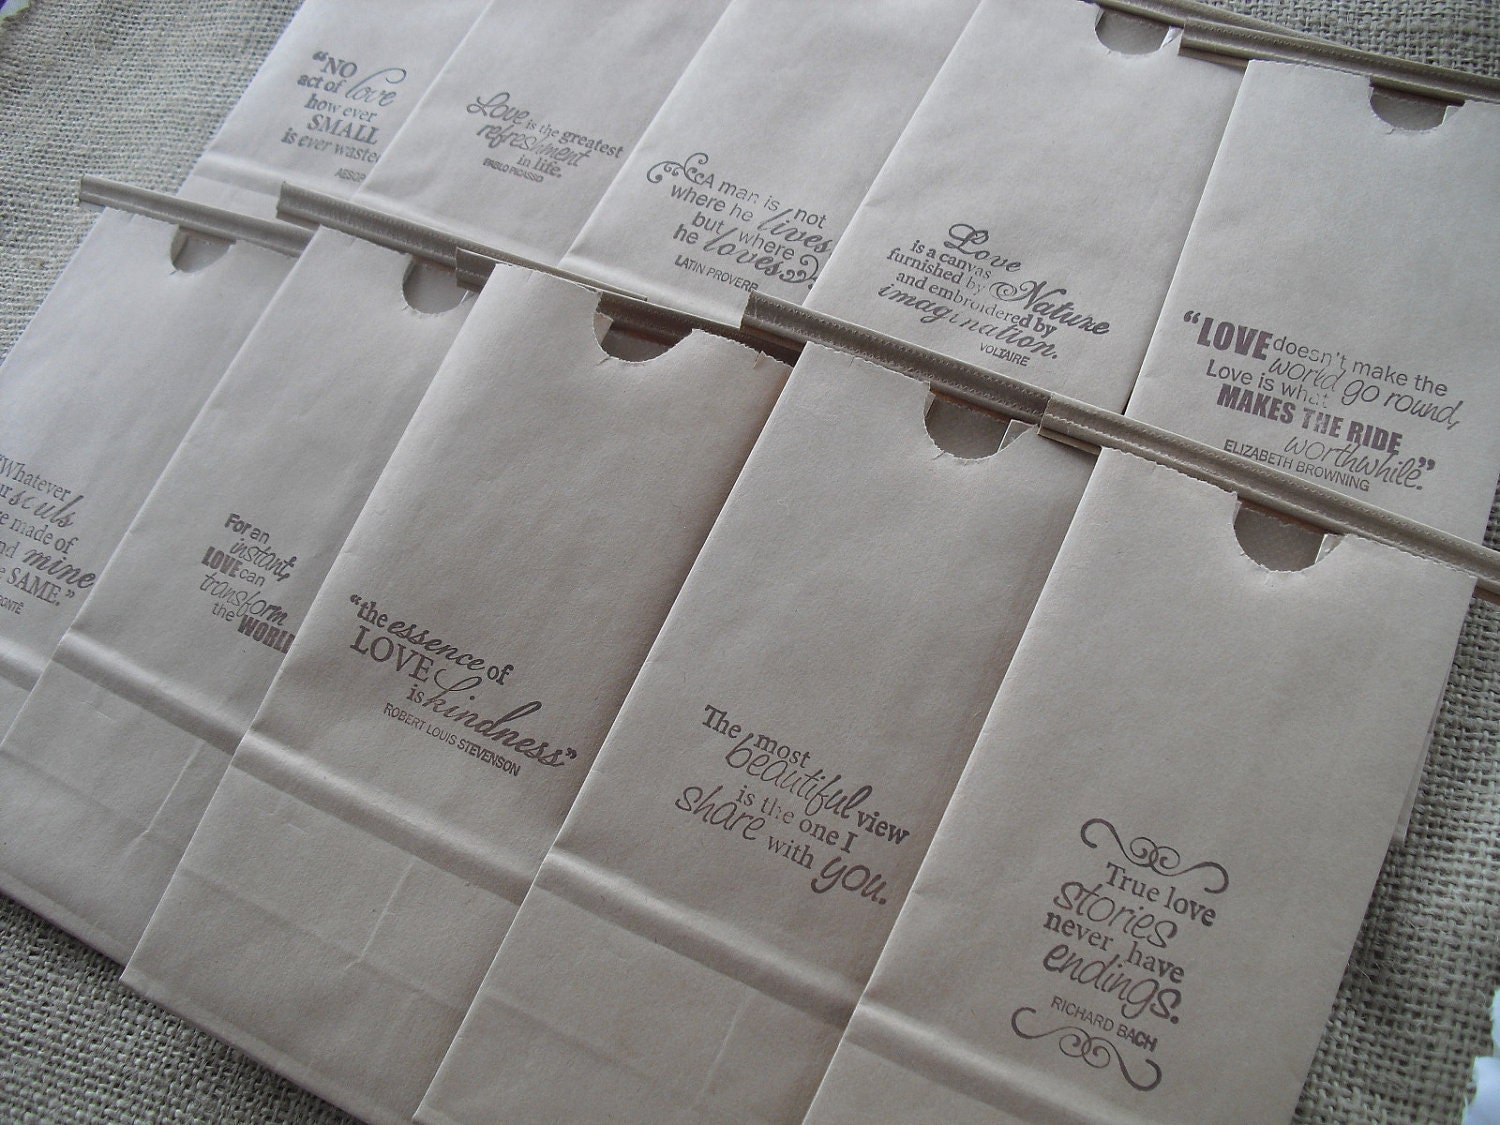 Famous loved quotes rubberstamped onto kraft paper lunch bags